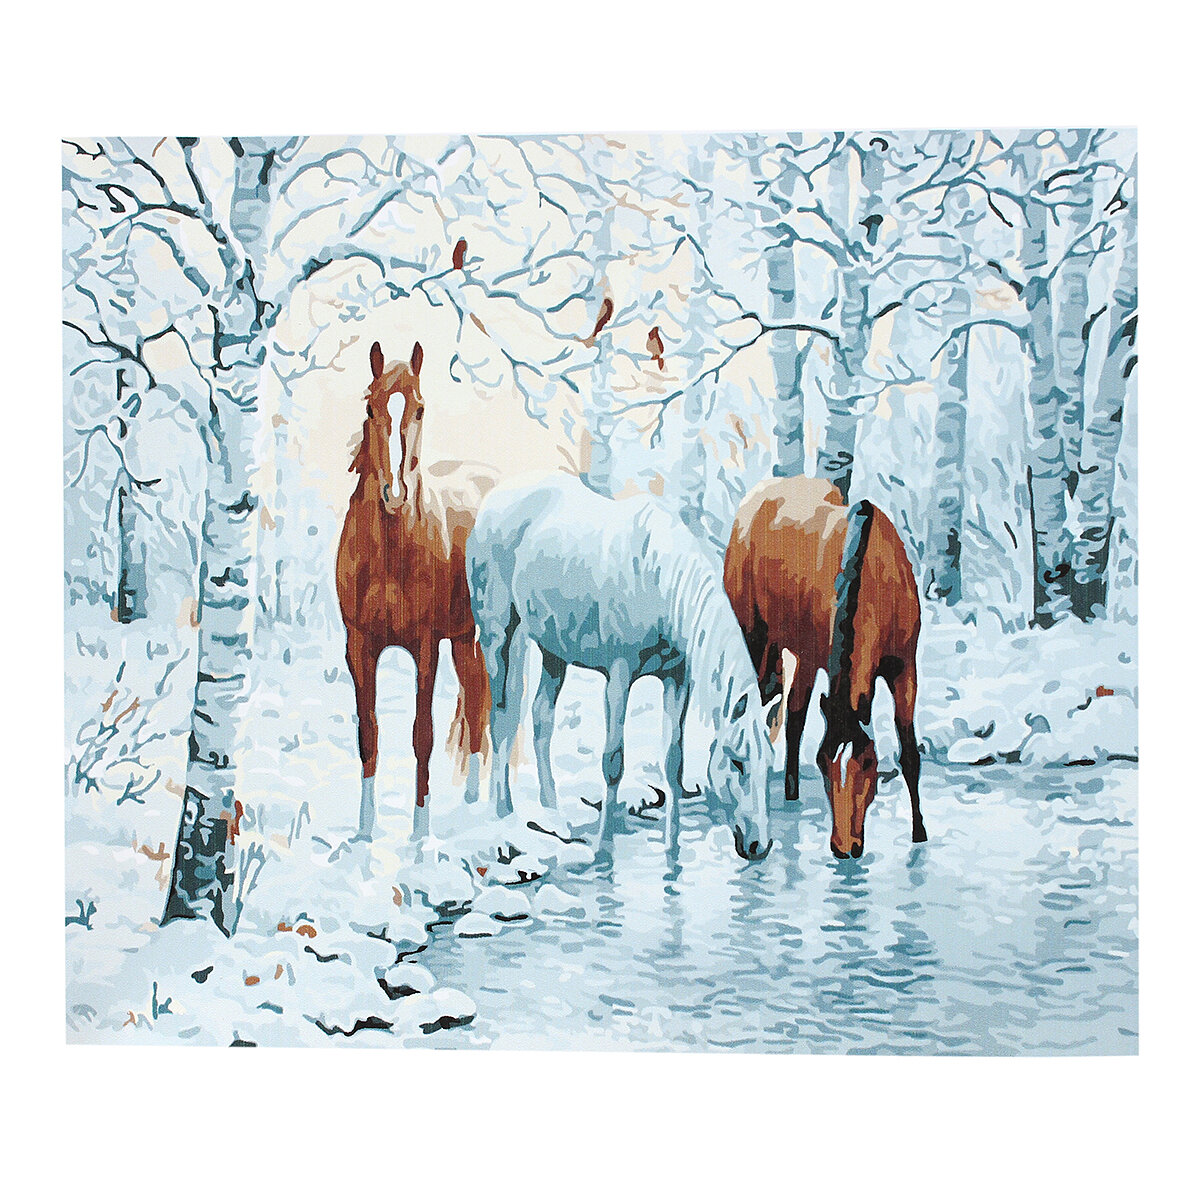 

DIY Painting by Numbers Canvas Oil Painting Kit Three Horses In Ice Forest Home Wall Decoration for Kids Adults Beginner